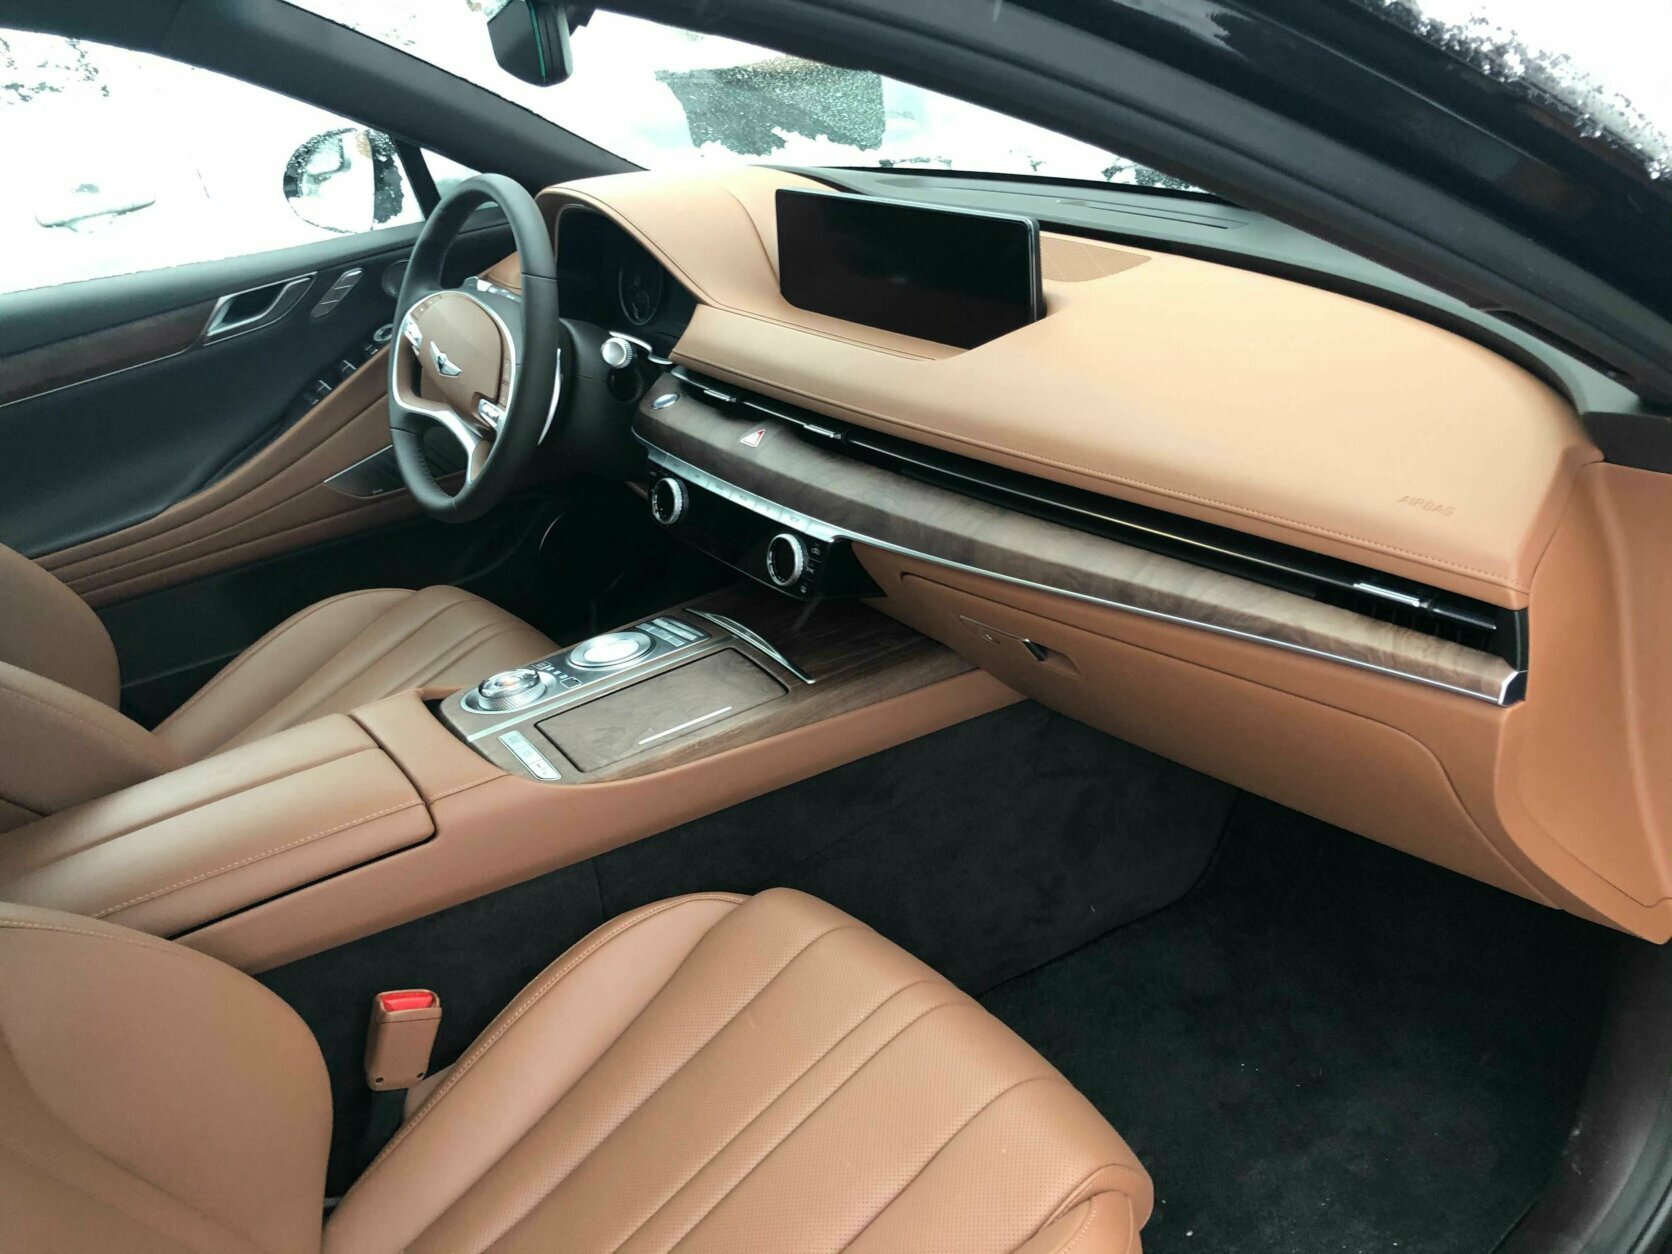 <p>The interior will make luxury car buyers take notice of the Genesis brand. With high quality materials and loads of space.</p>
